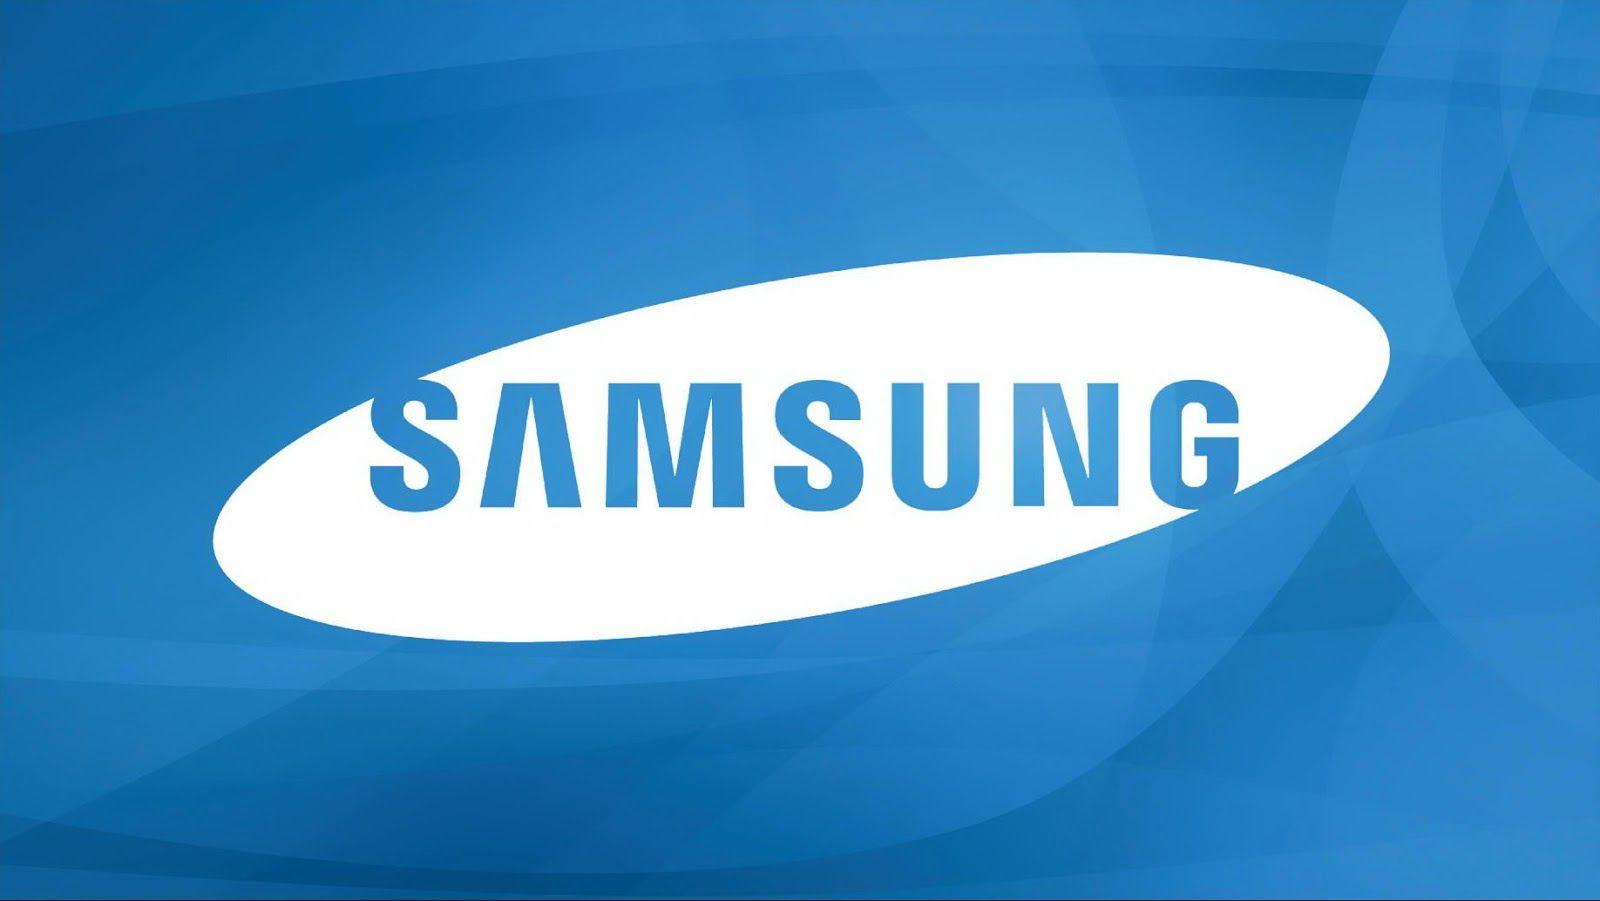 Samsung Mobile Logo - Samsung Logo. Samsung Logo Design Vector Icon Free Download